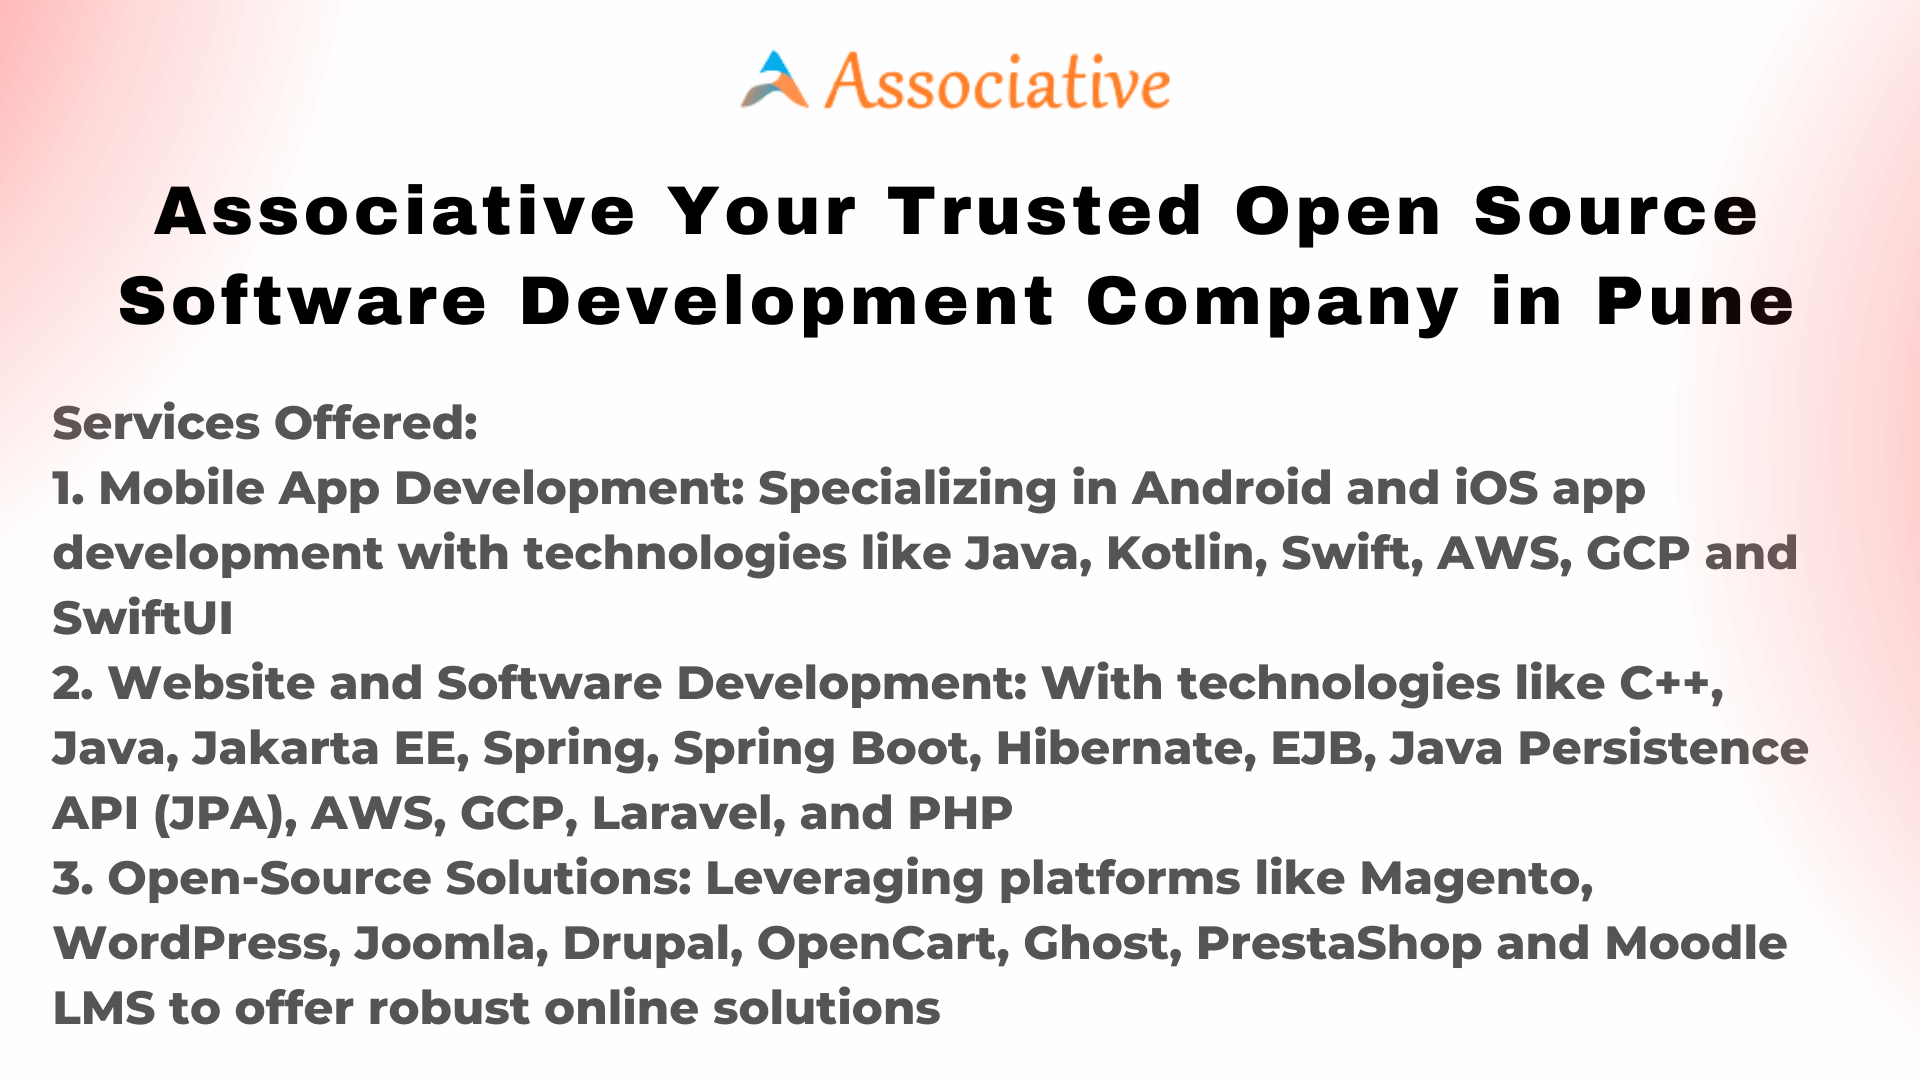 Associative Your Trusted Open Source Software Development Company in Pune